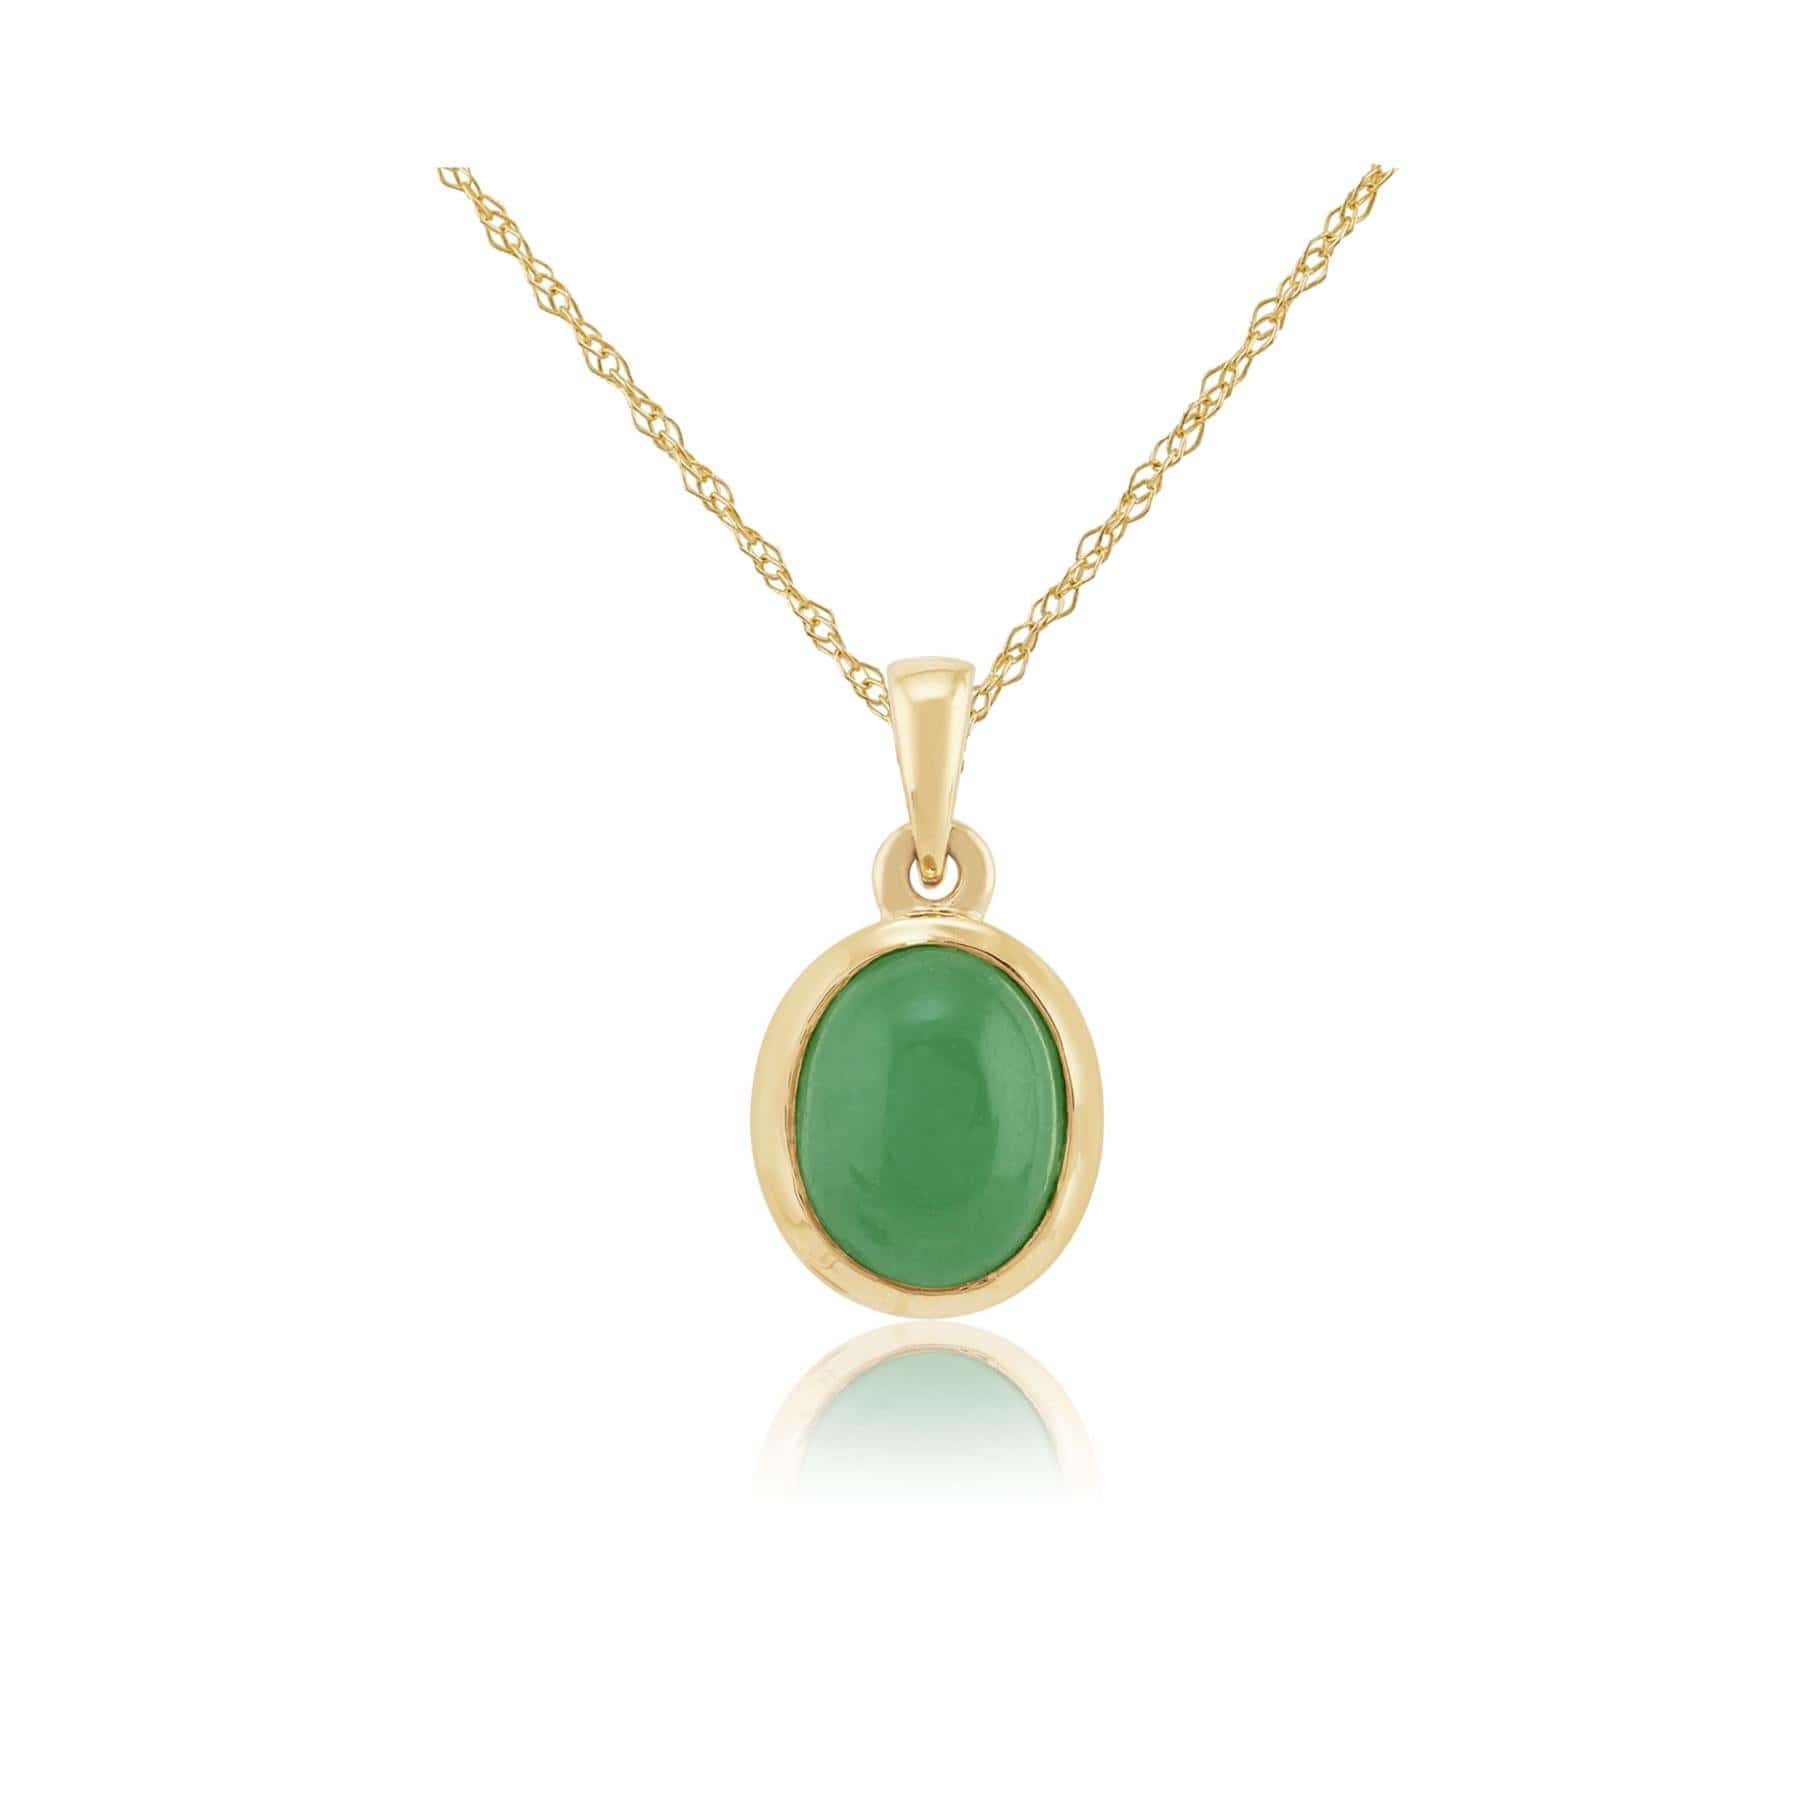 Photos - Pendant / Choker Necklace Classic 2.53ct Dyed Green Jade Cabochon Pendant Necklace in 9ct Yellow Gol